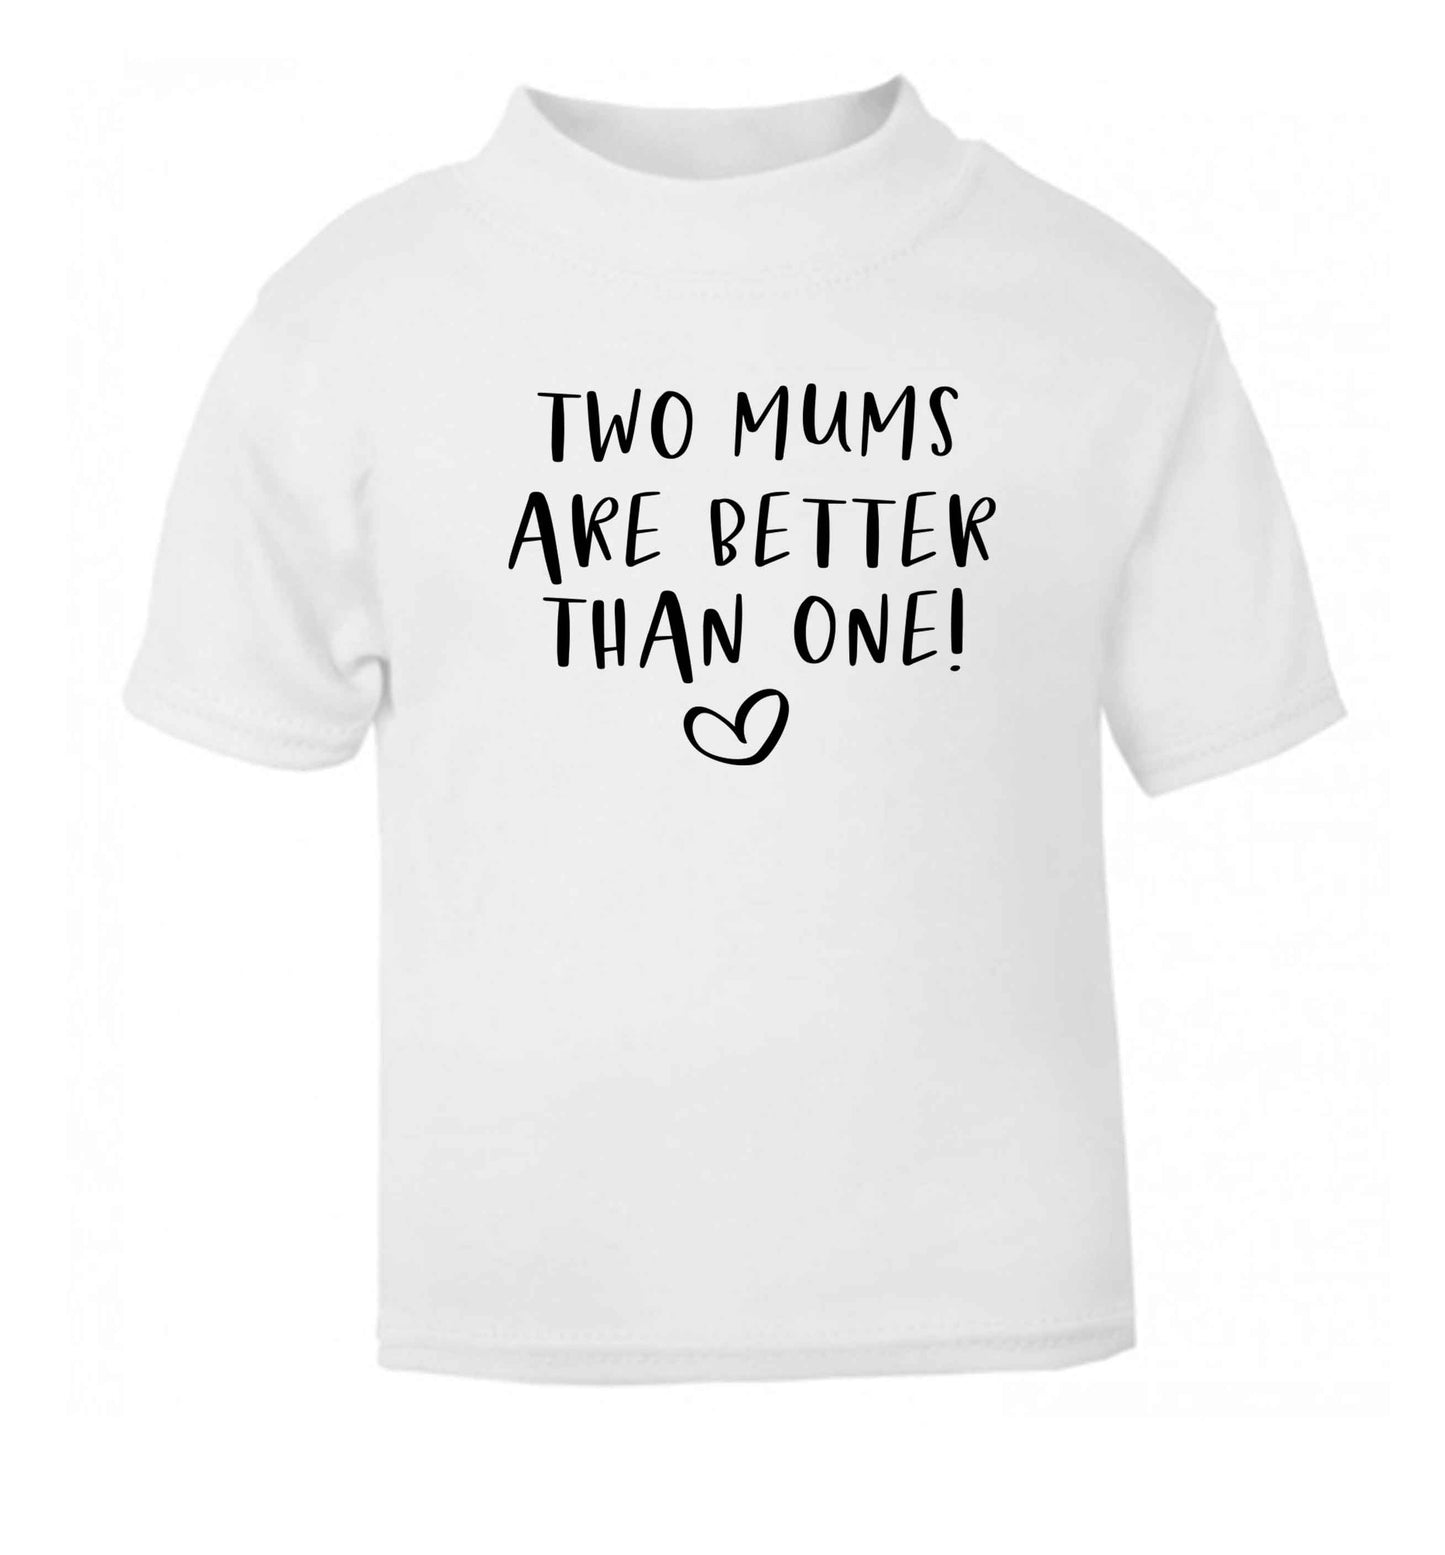 Two mums are better than one white baby toddler Tshirt 2 Years